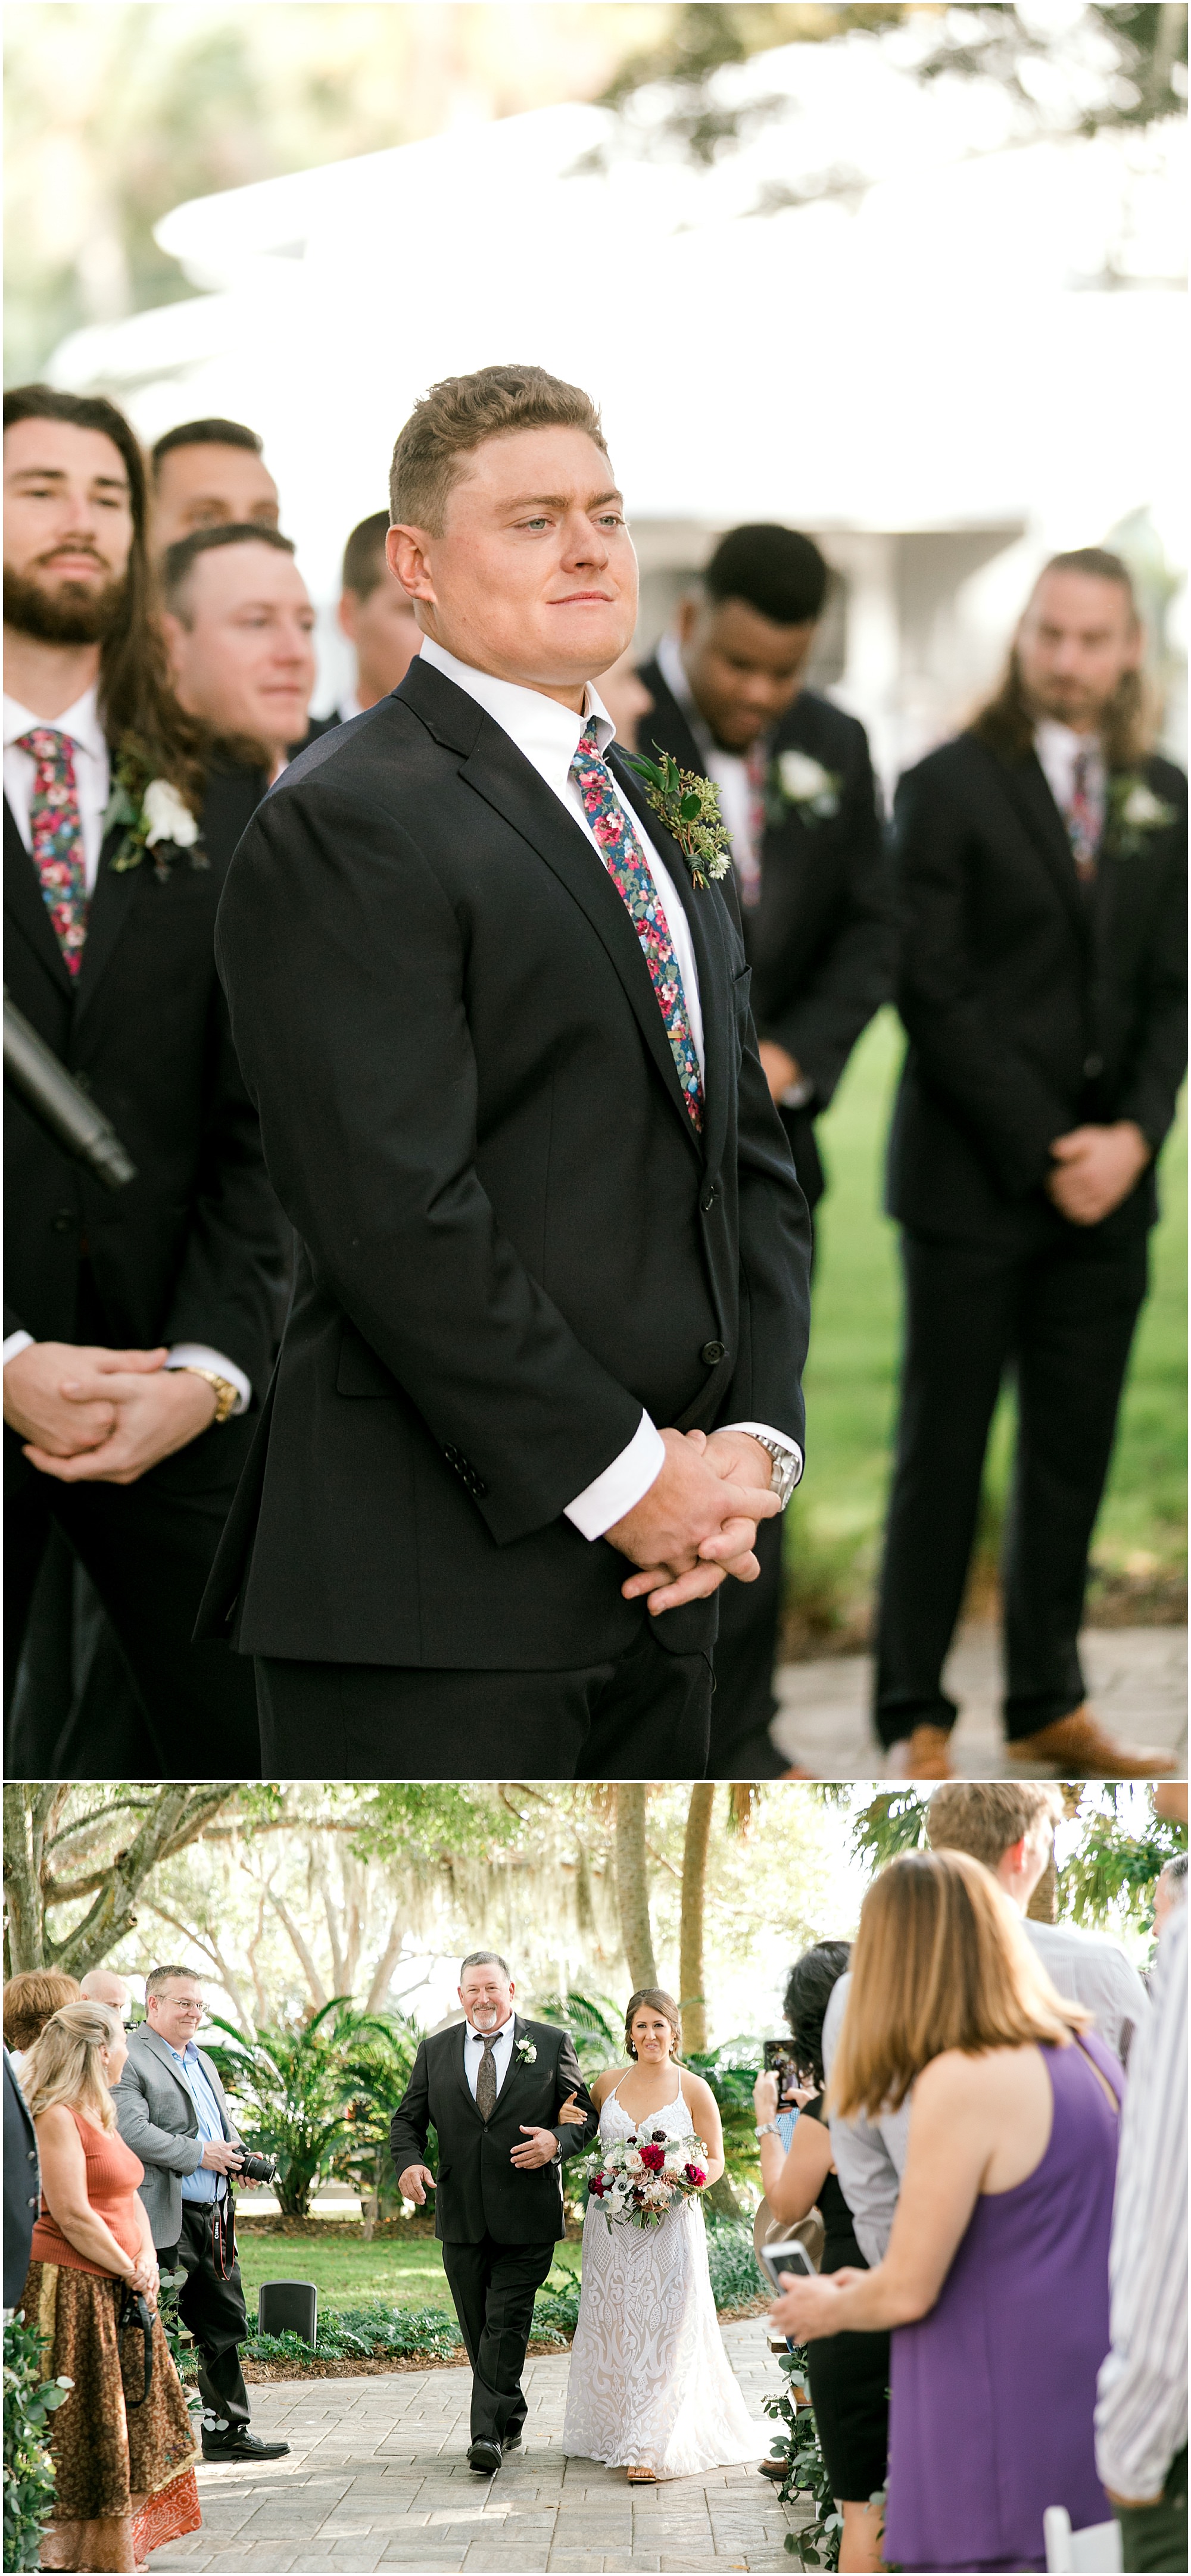 groom watching his bride come down the aisle in her Hayley Paige dusty rose wedding dress